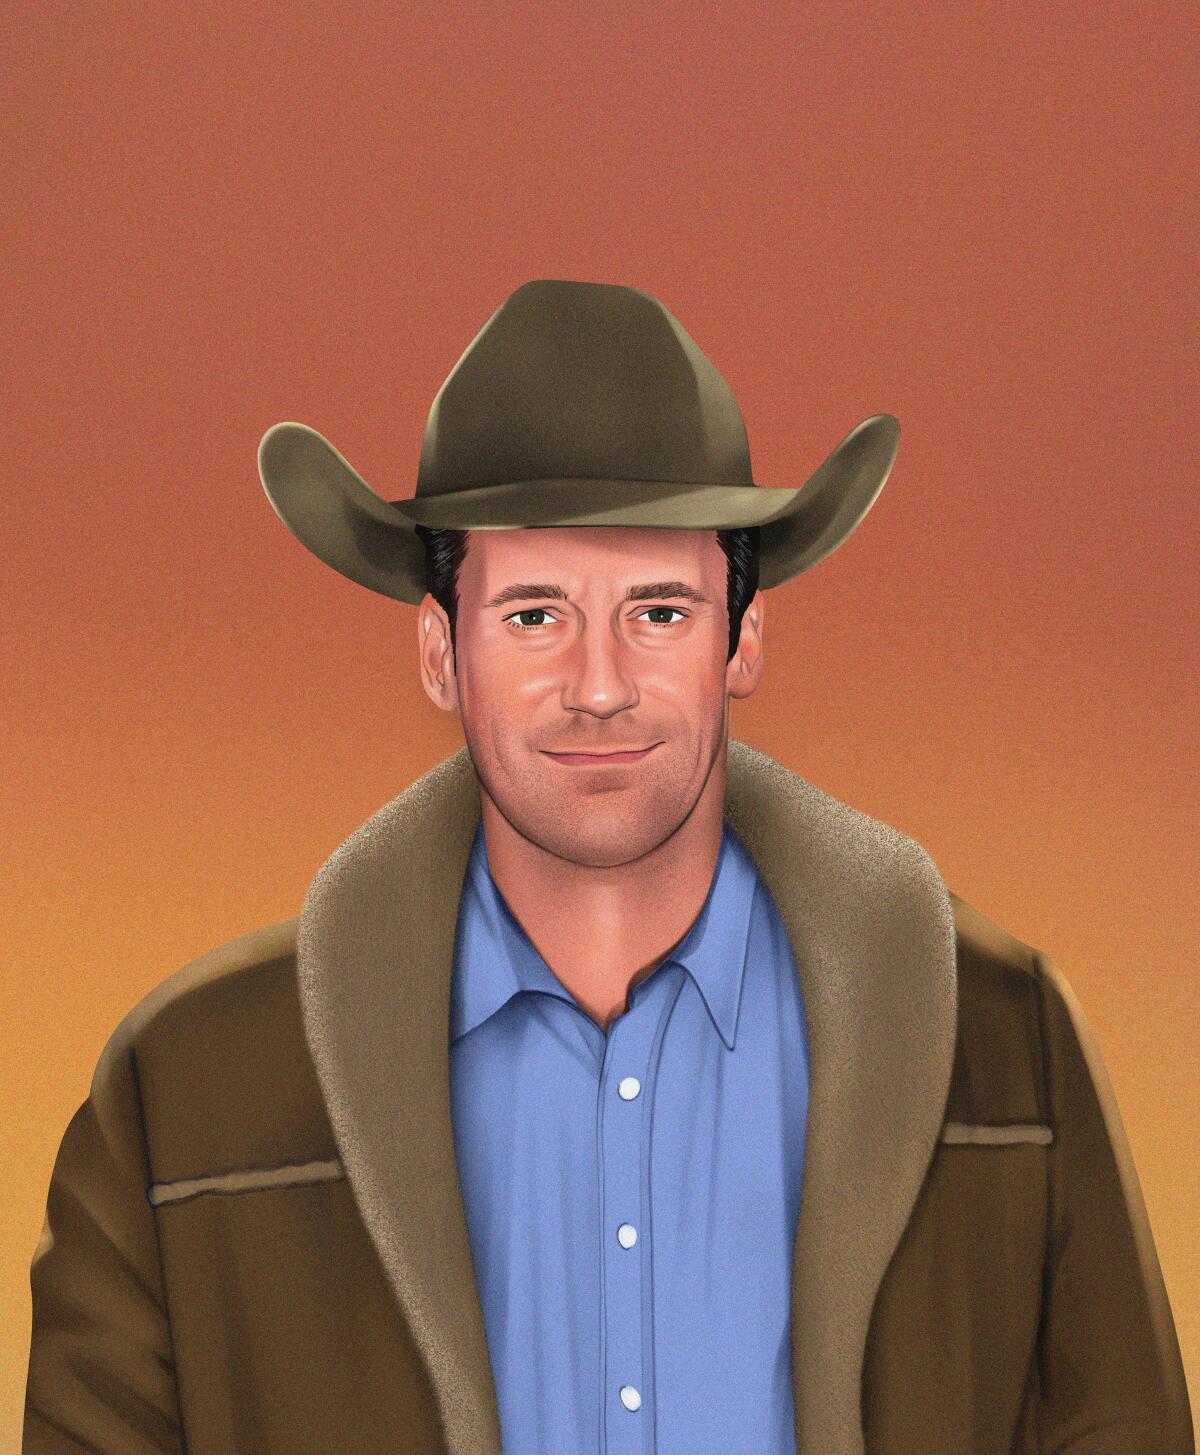 An illustration of Jon Hamm in cowboy hat and shearling coat.